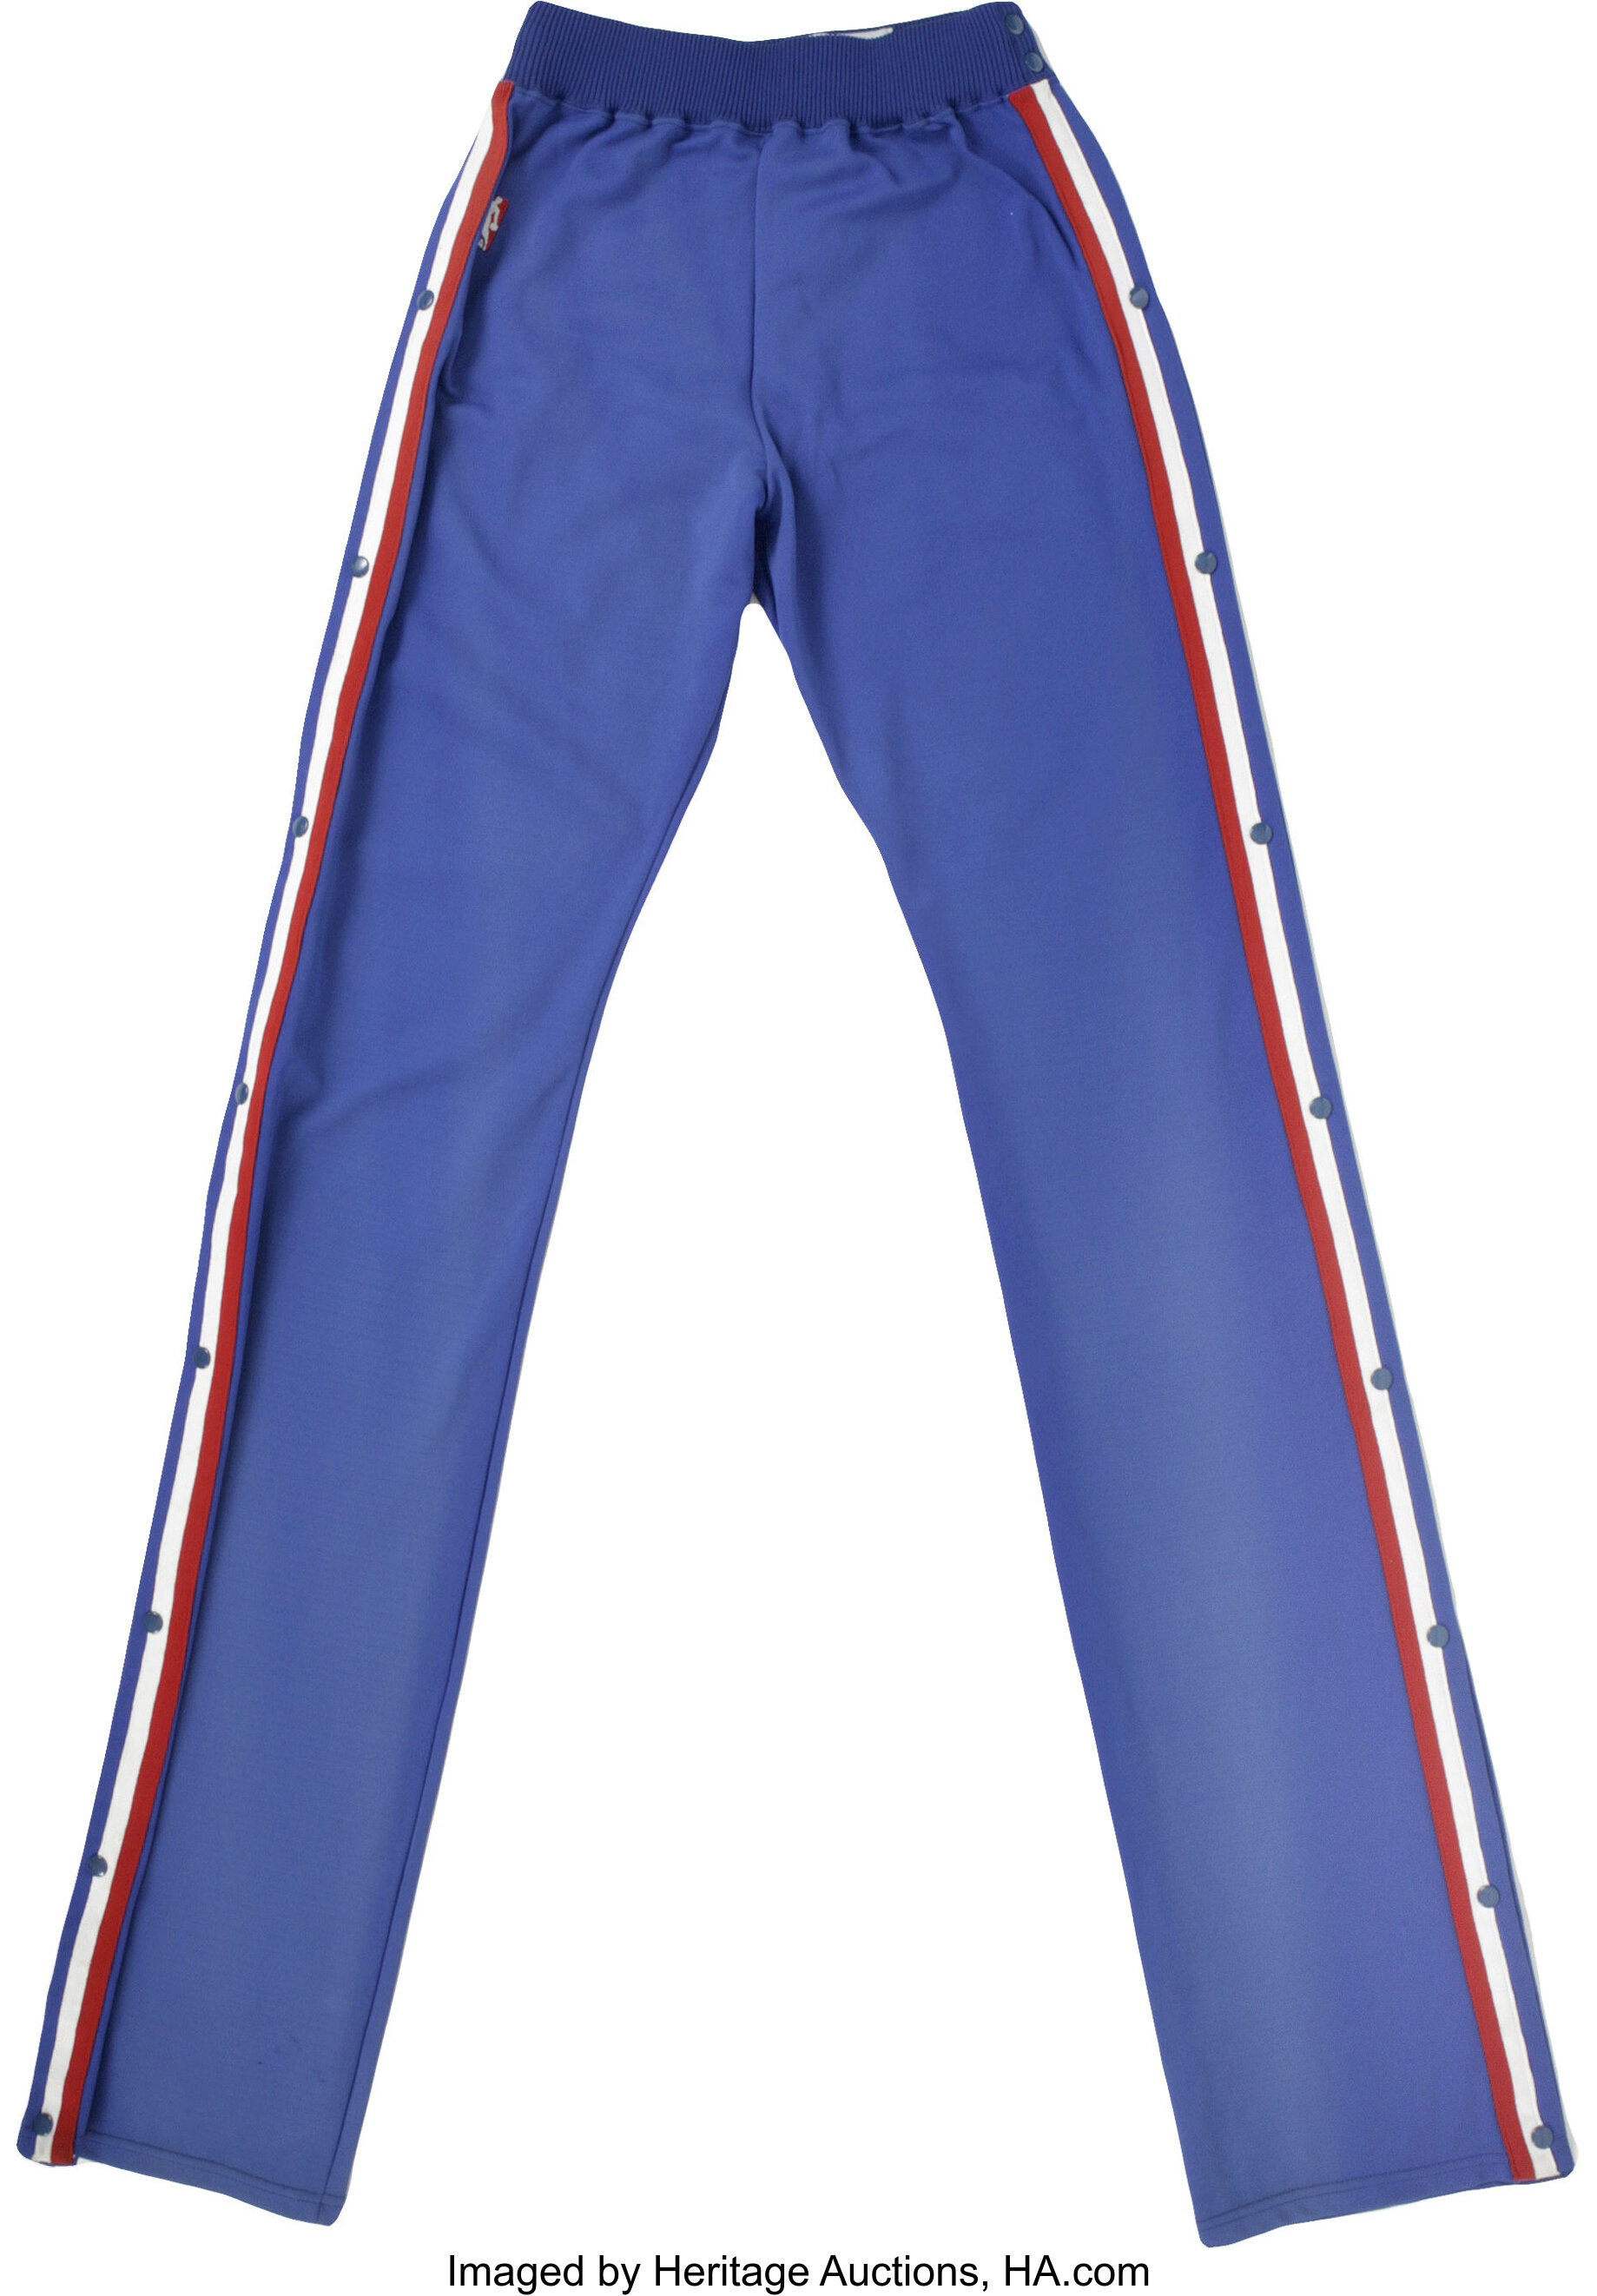 1990 91 Manute Bol Game Worn Warm Up Pants From The Time That He Lot Heritage Auctions